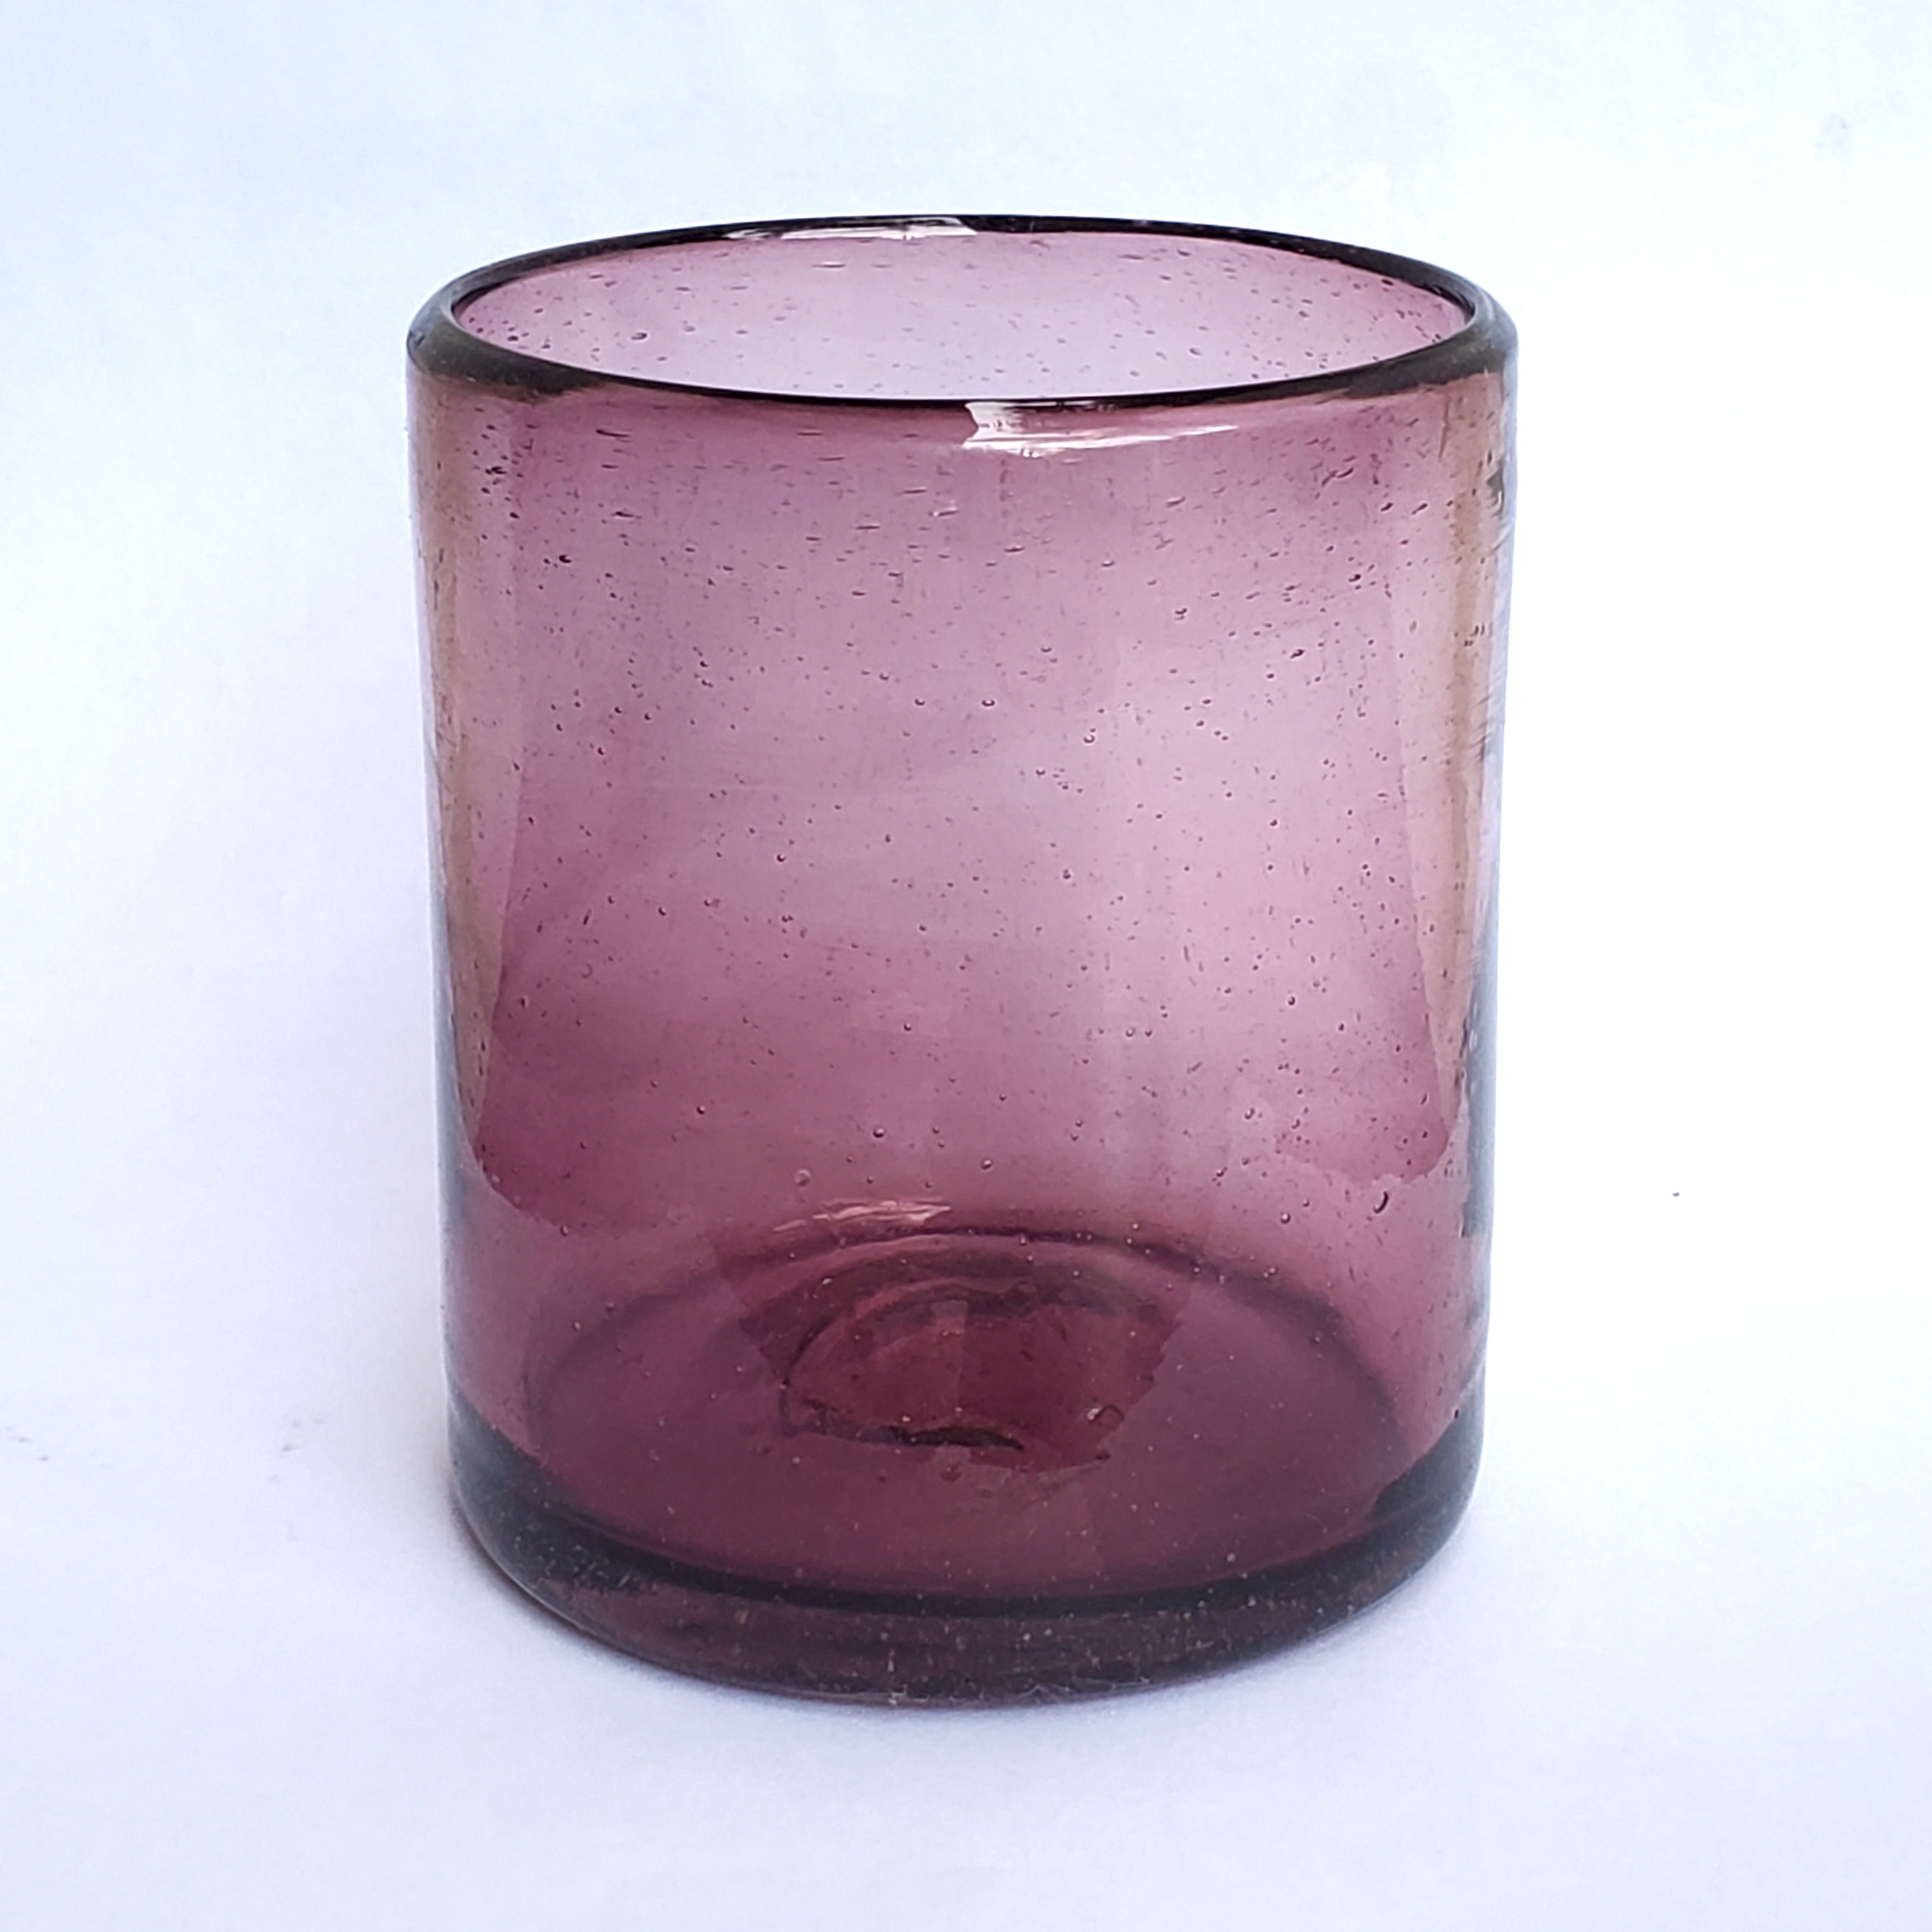 Colores Solidos al Mayoreo / yst 9 oz Short Tumblers (set of 6) / Enhance your table setting with our beautiful Amethyst colored glasses.